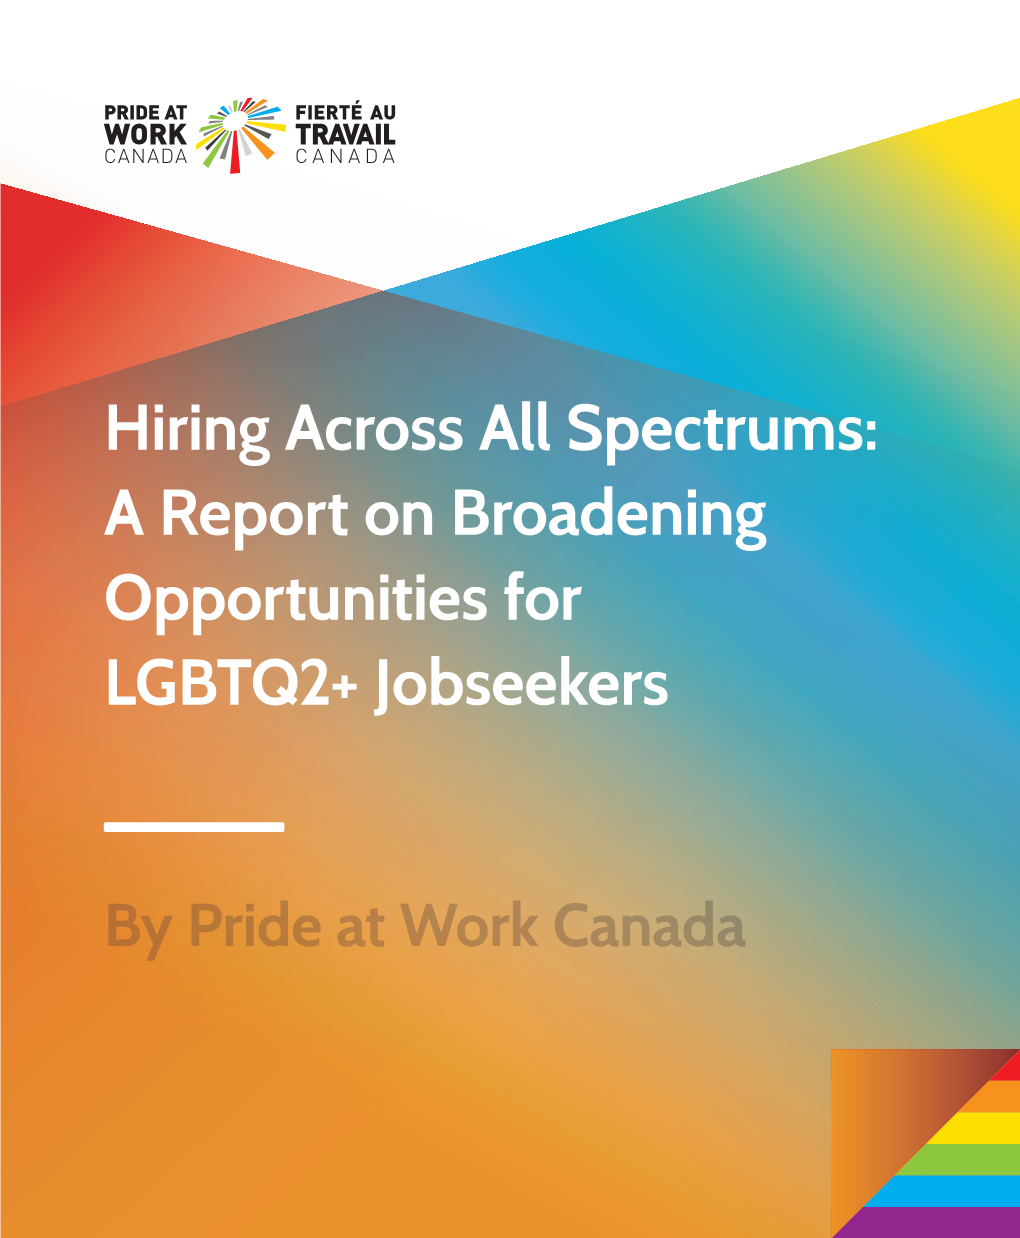 Hiring Across All Spectrums: a Report on Broadening Opportunities for LGBTQ2+ Jobseekers